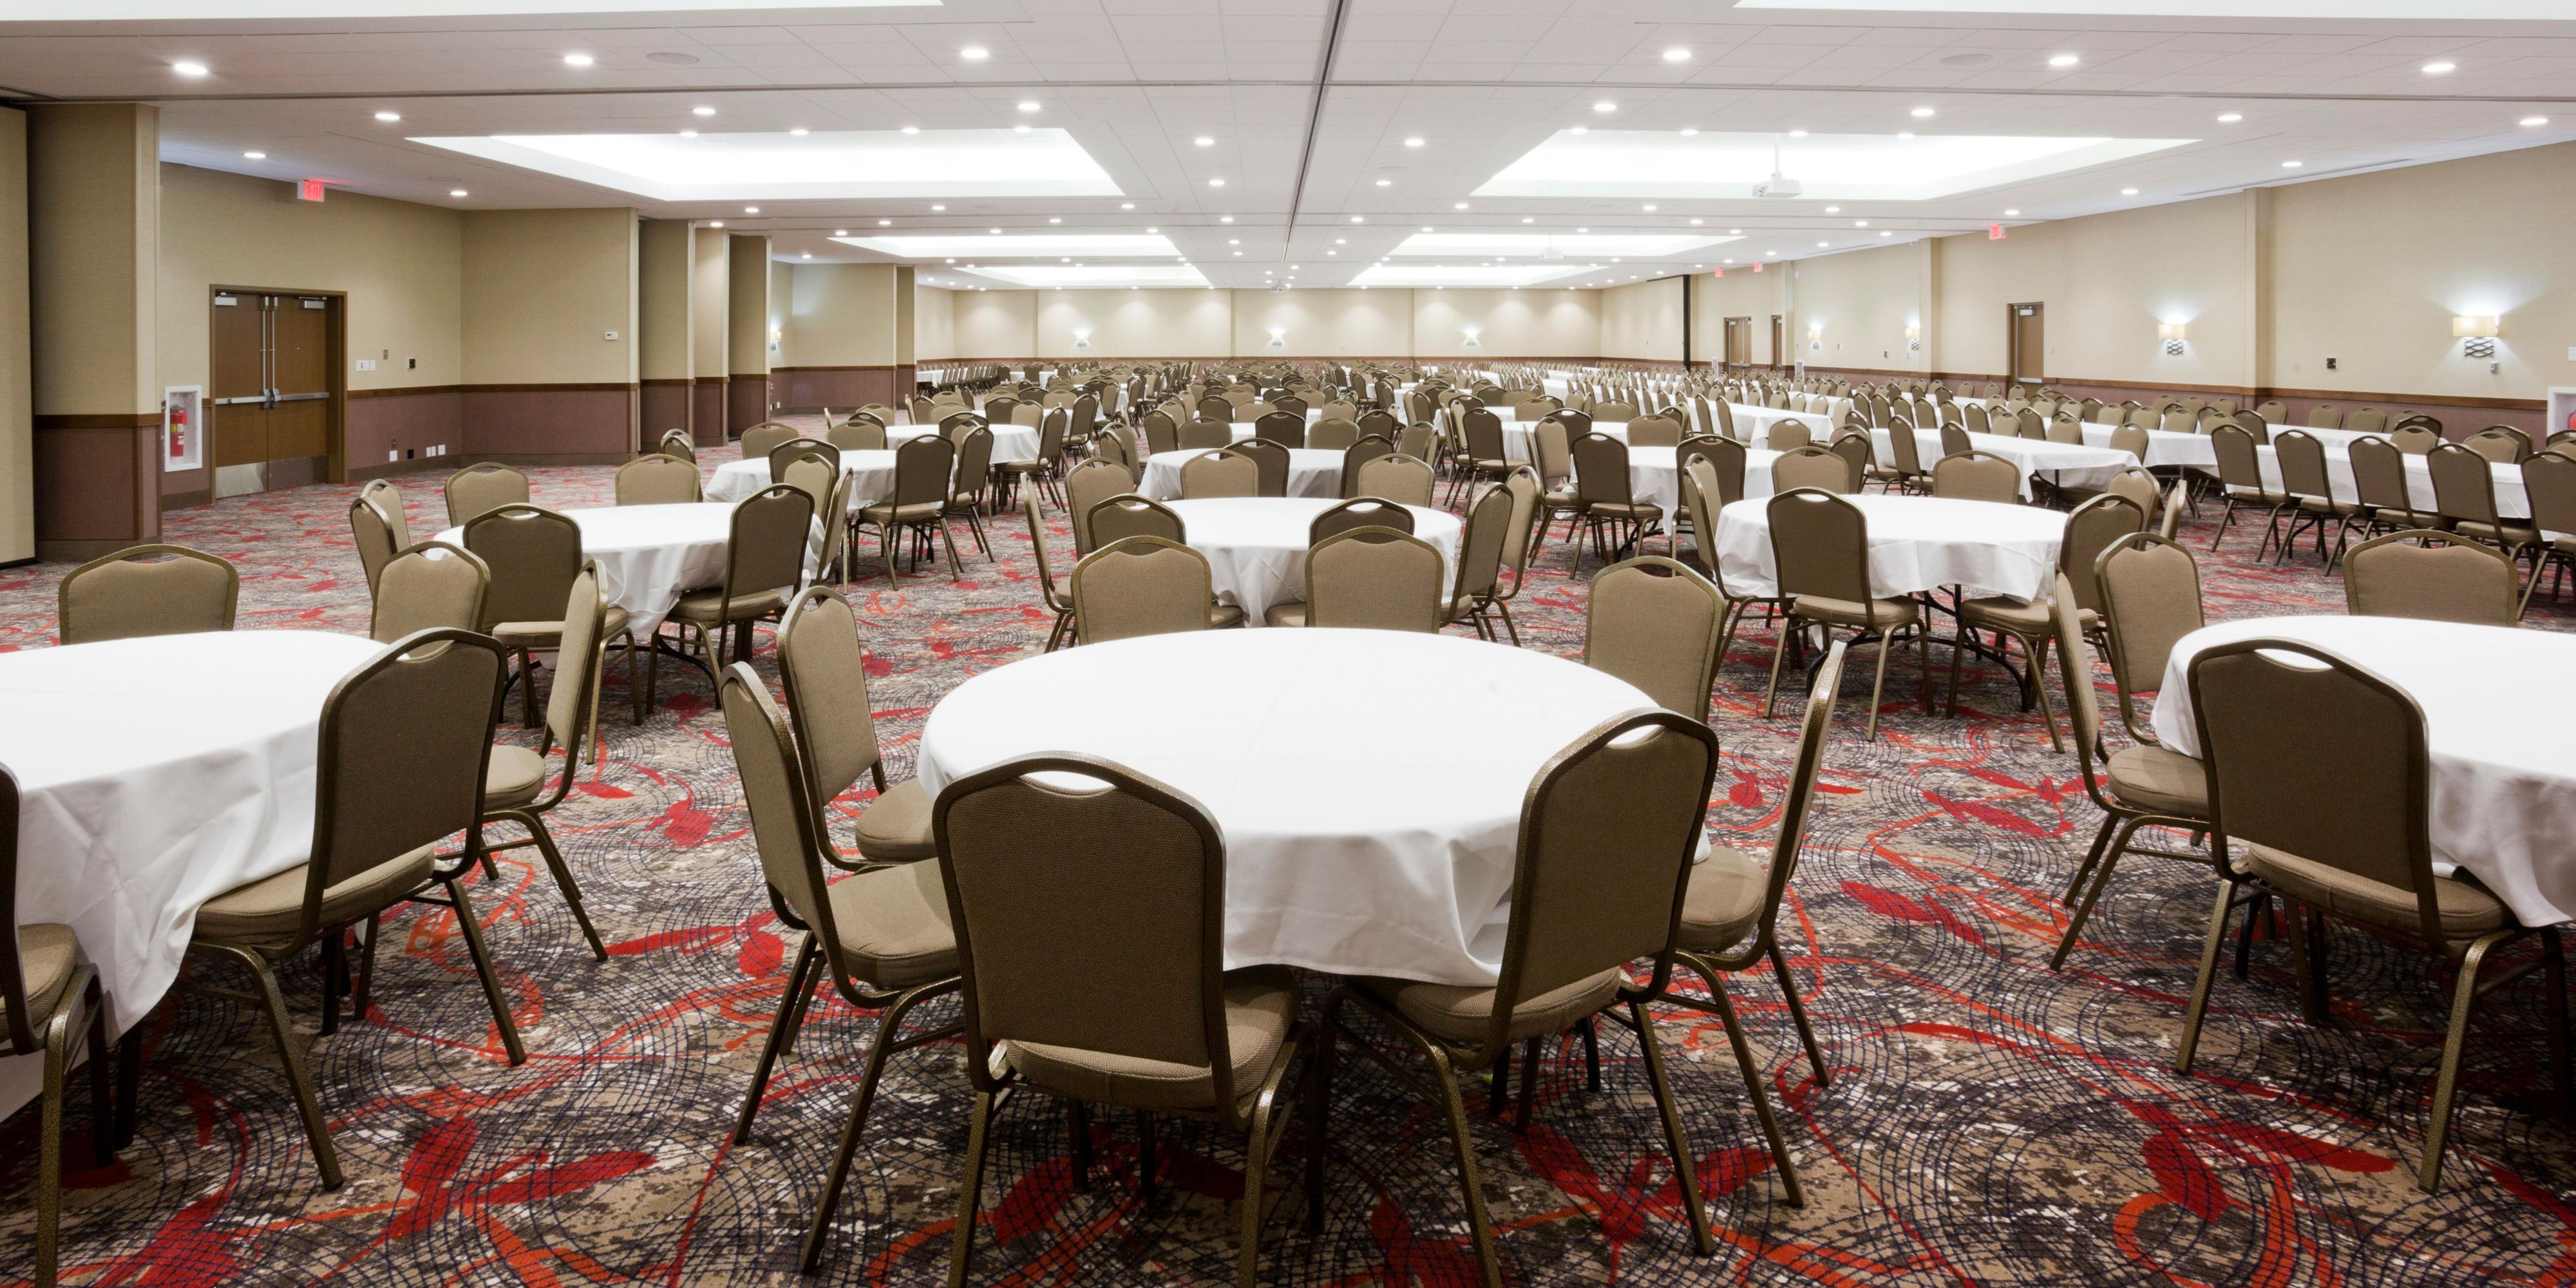 Our hotel offers flexible meeting space for 5-1300 people! Connected to the Willmar Conference Center there's plenty of space to host big corporate events, weddings and so much more!